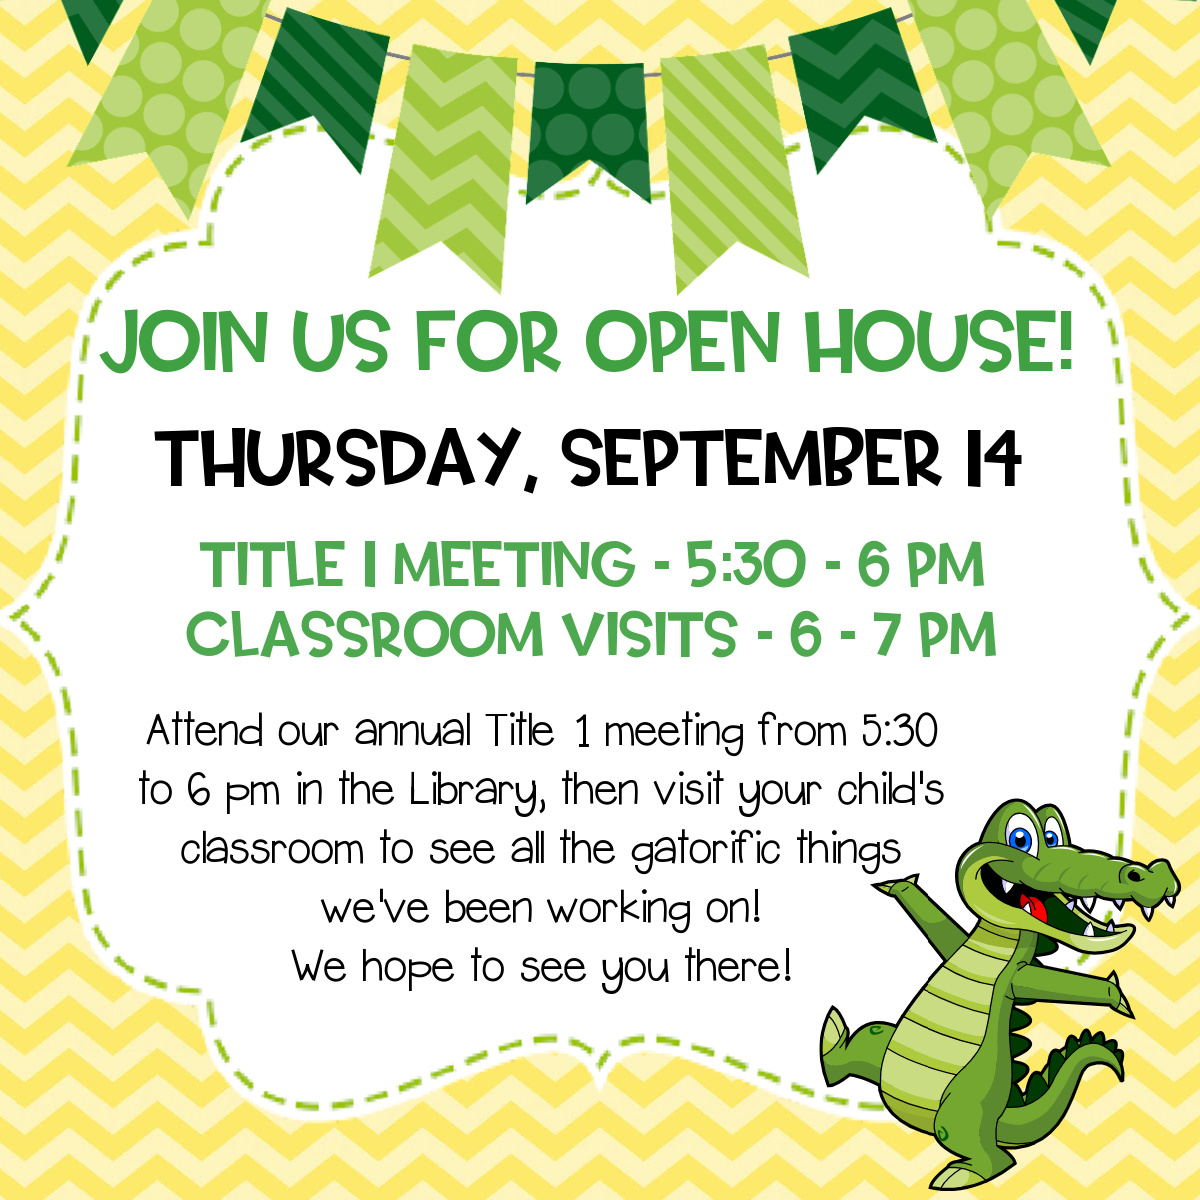 Don't forget - Open House & our annual Title 1 Meeting are coming up next Thursday, September 14! The Title 1 meeting will be held in the library from 5:30 - 6 pm, followed by our regular Open House activities from 6 to 7 pm. See you there!